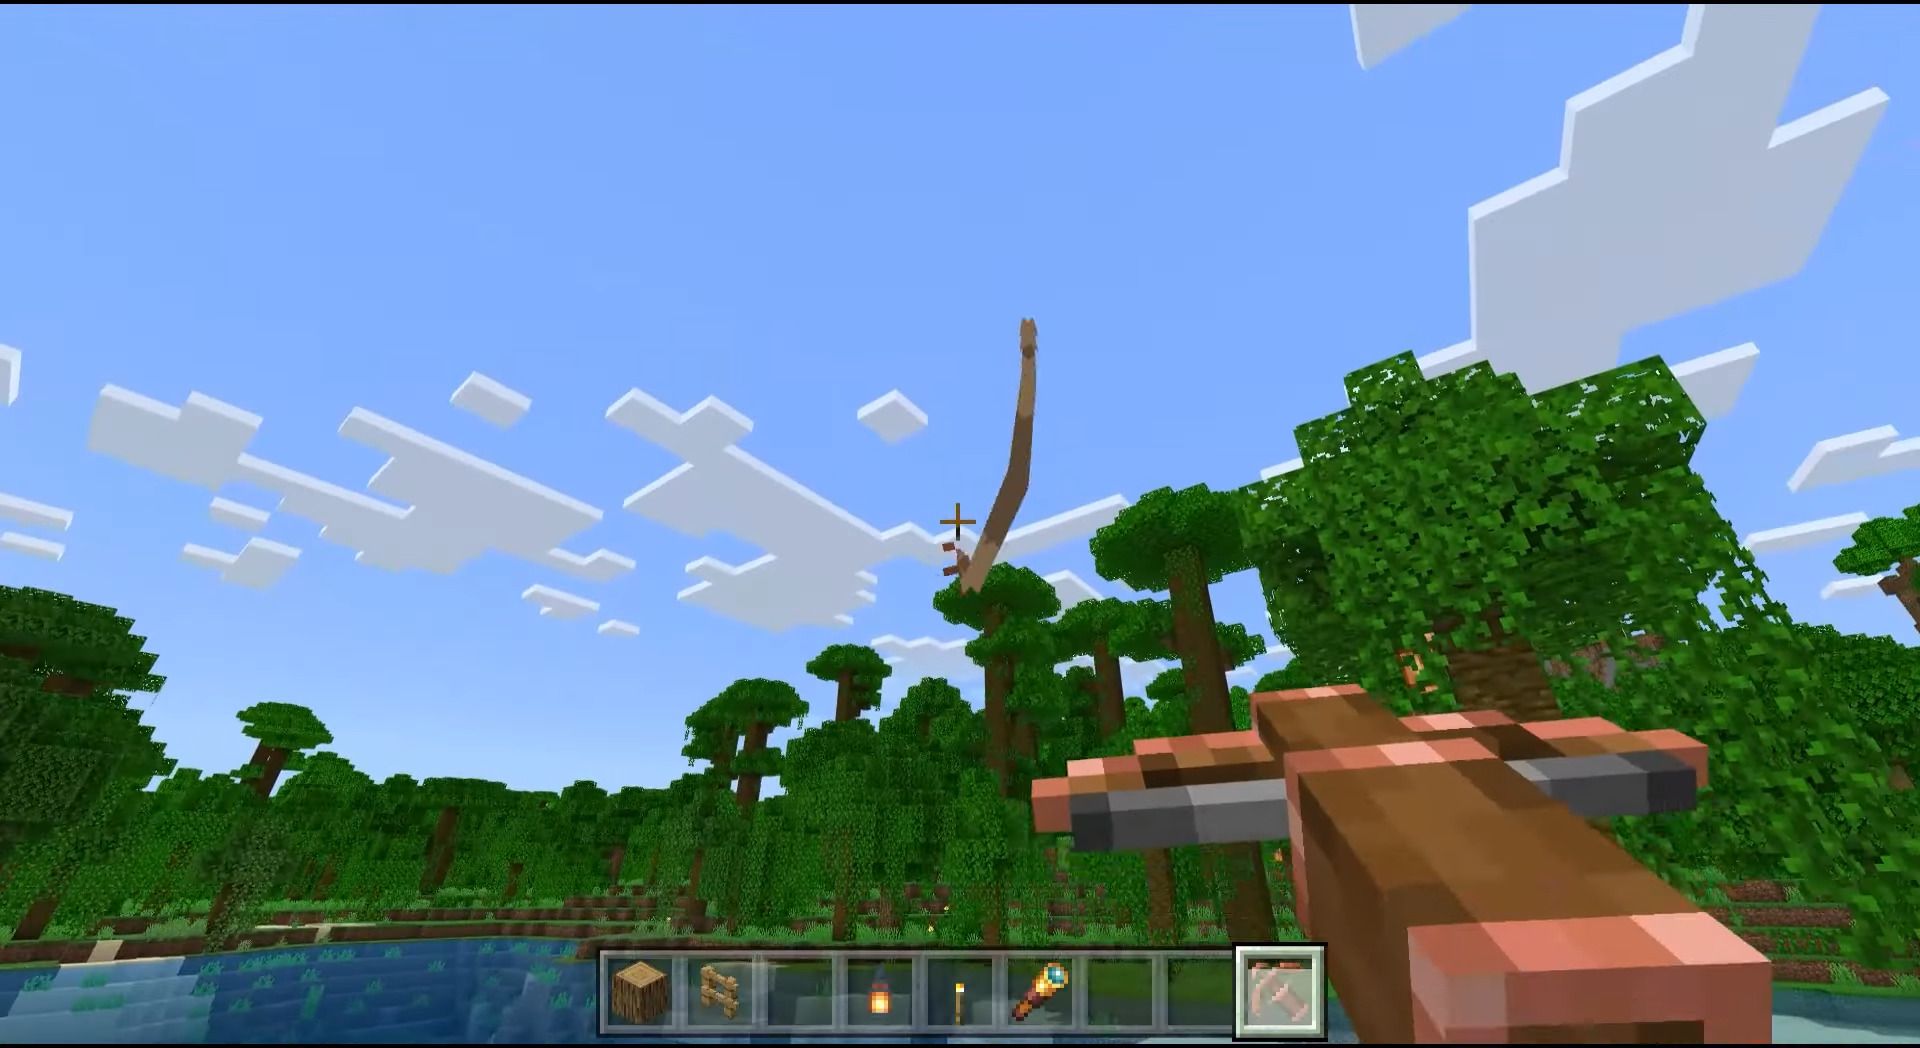 Grappling Hook (1.18, 1.17) - Climb, Swing, Launch with Hook 6